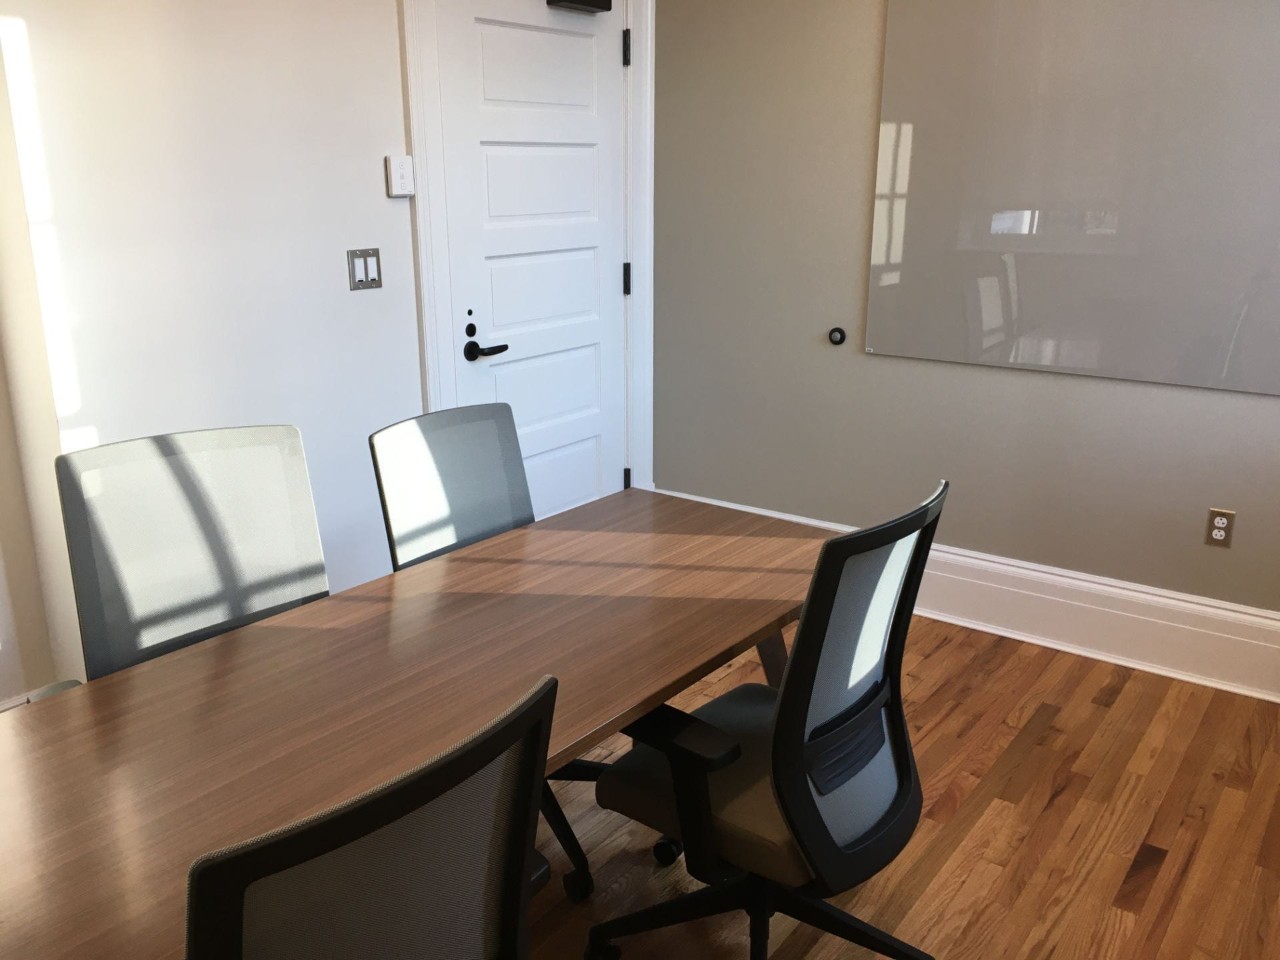 Small meeting room with rectangular table, chairs and glass writing board